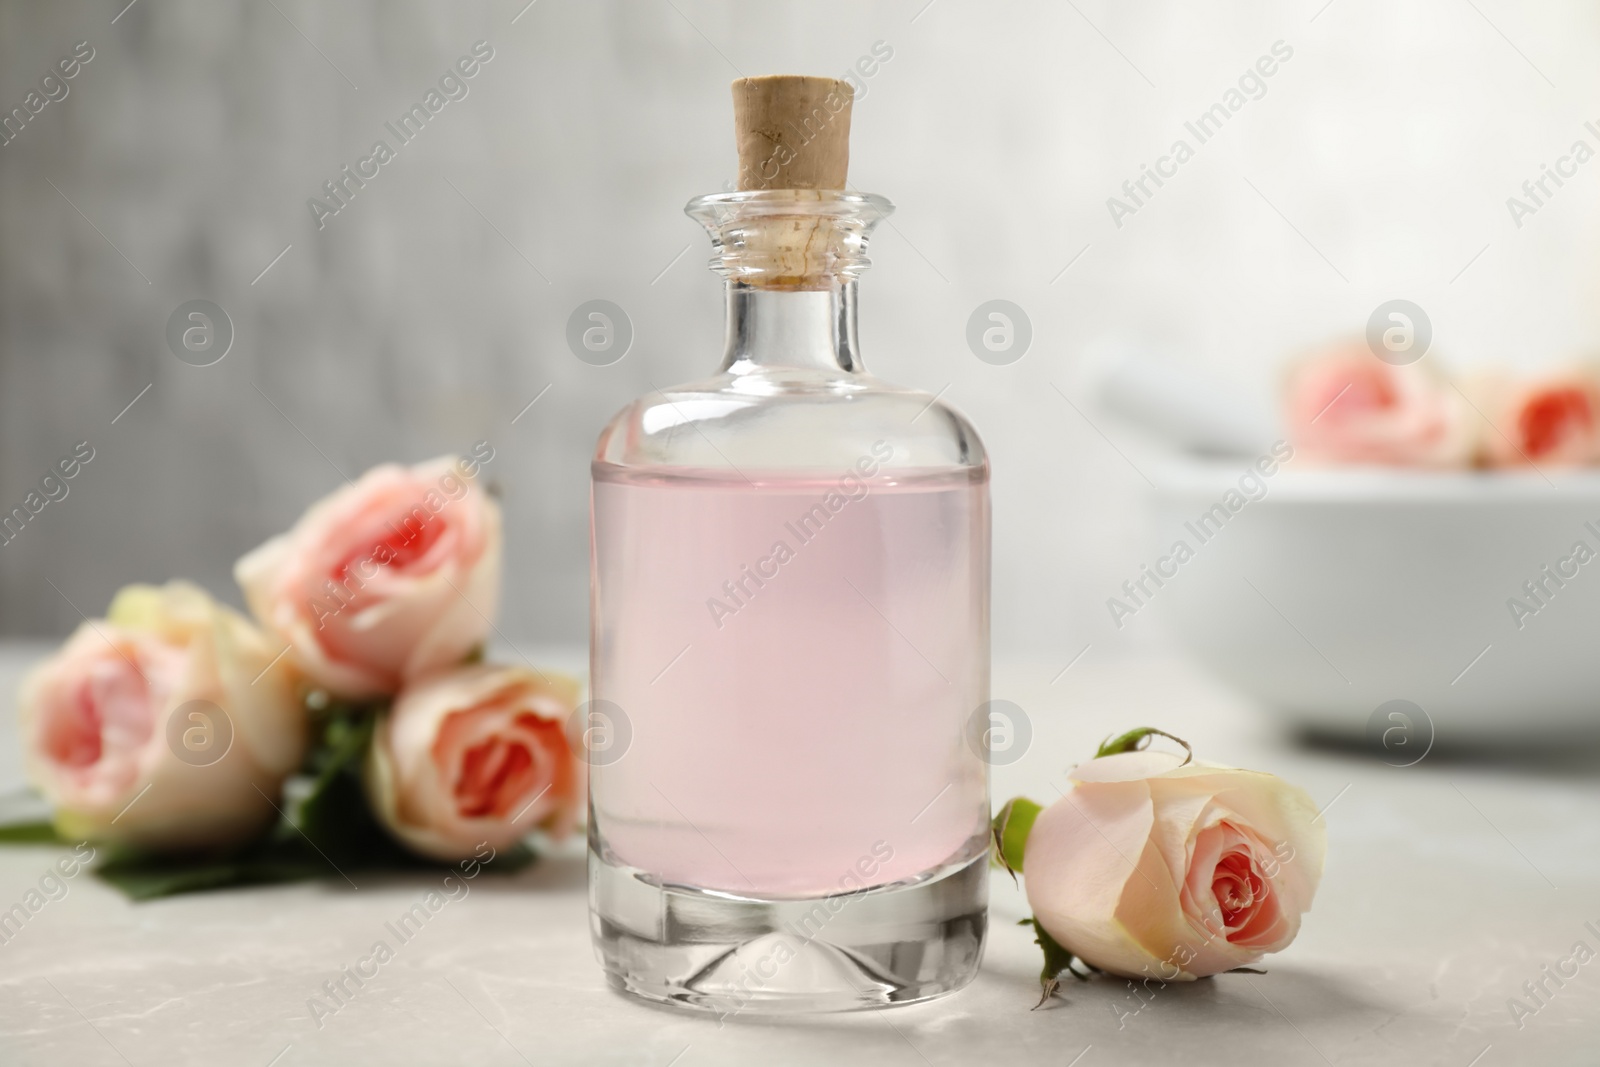 Photo of Bottle of rose essential oil and flowers on white table